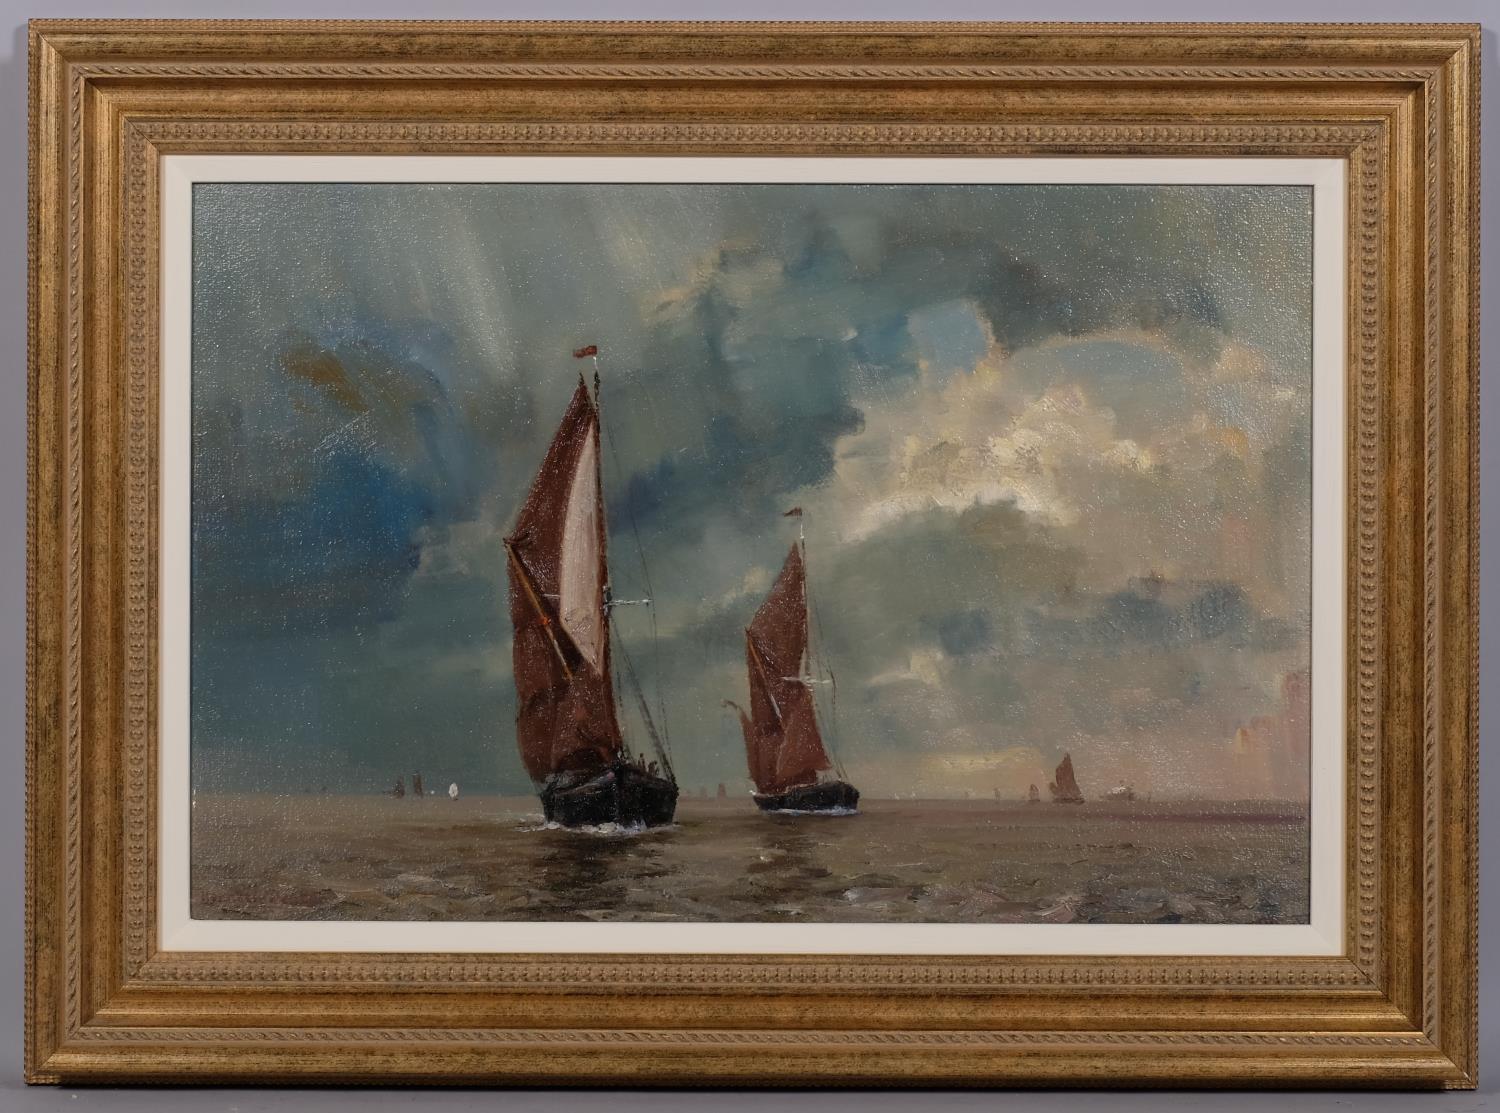 Kenneth Denton (born 1932), barges in the estuary, circa 1982, oil on board, signed, provenance: